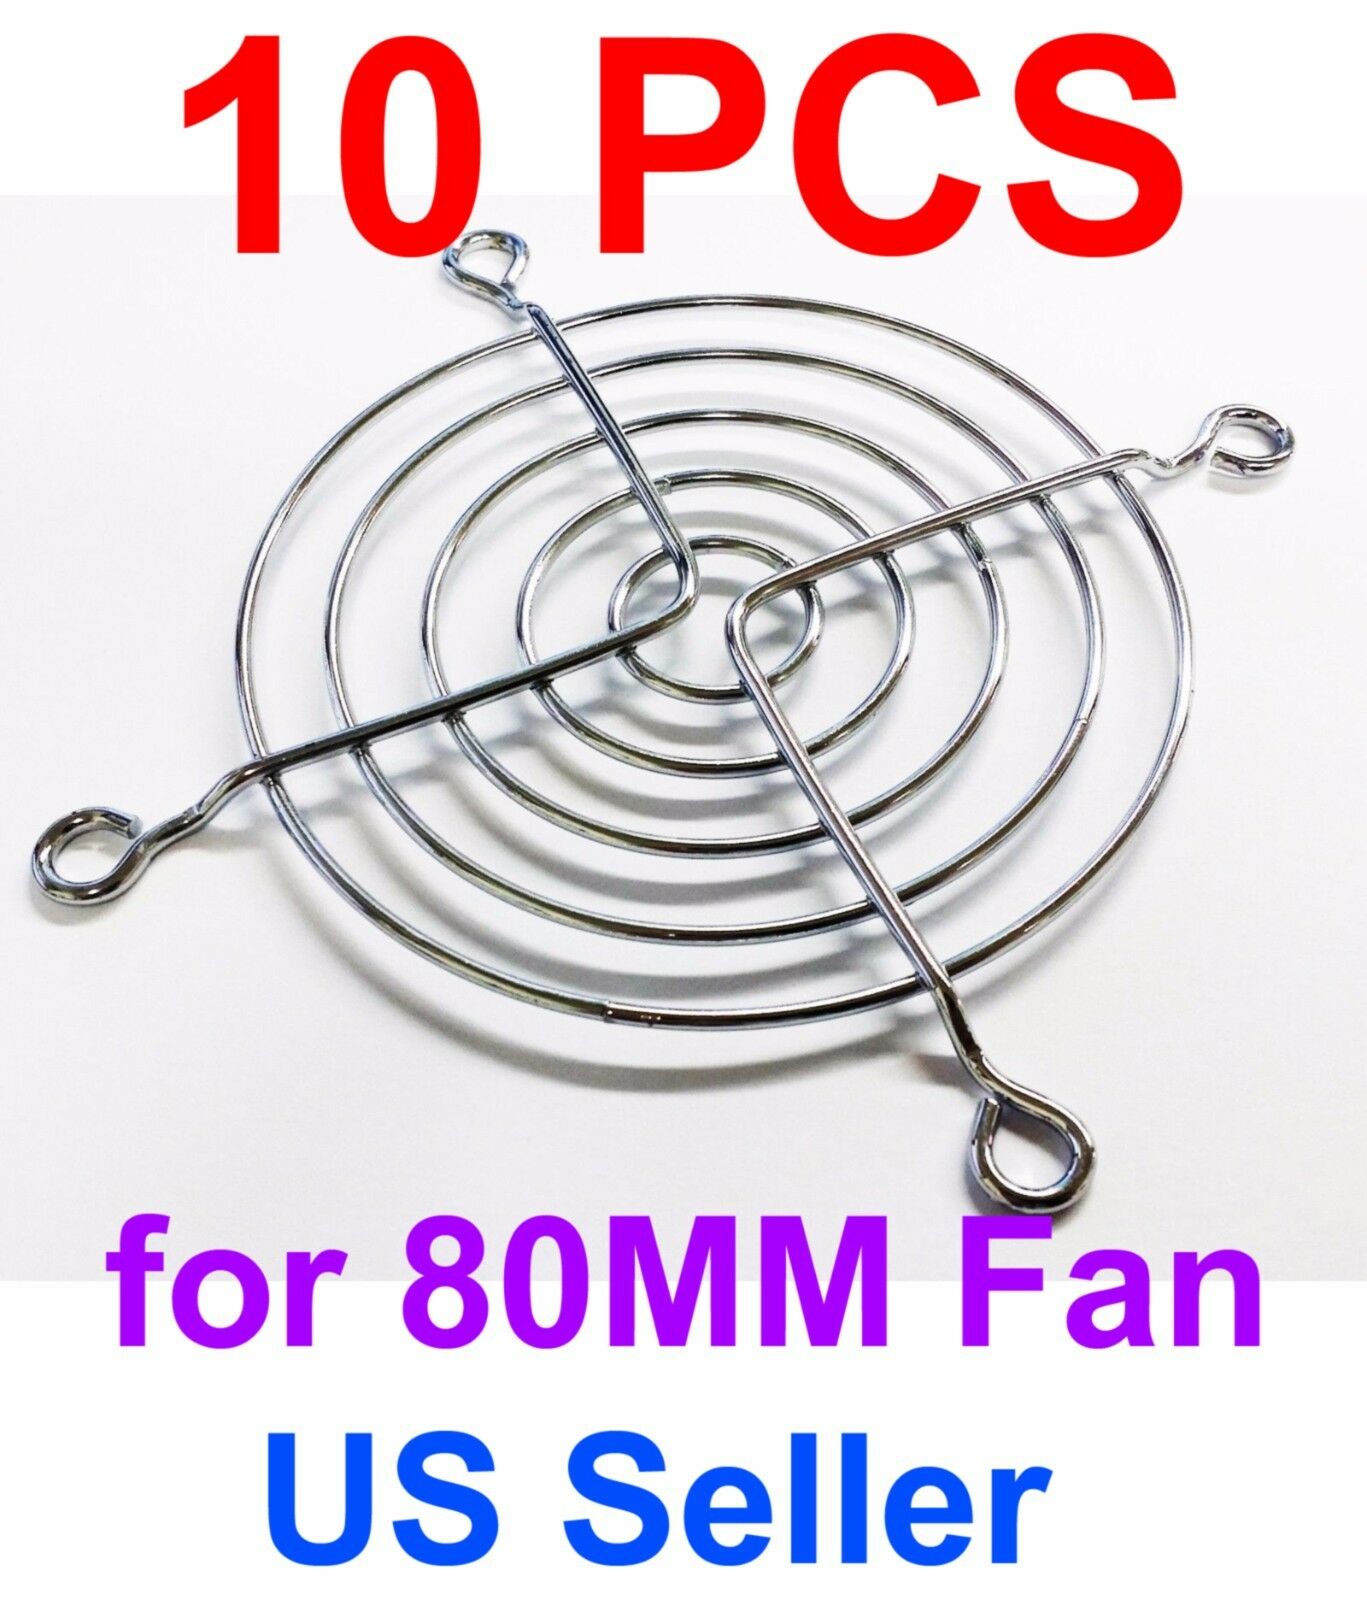 10 Pcs 80mm Chrome Metal Computer Pc Fan Grill Mounting Finger Guard Protection